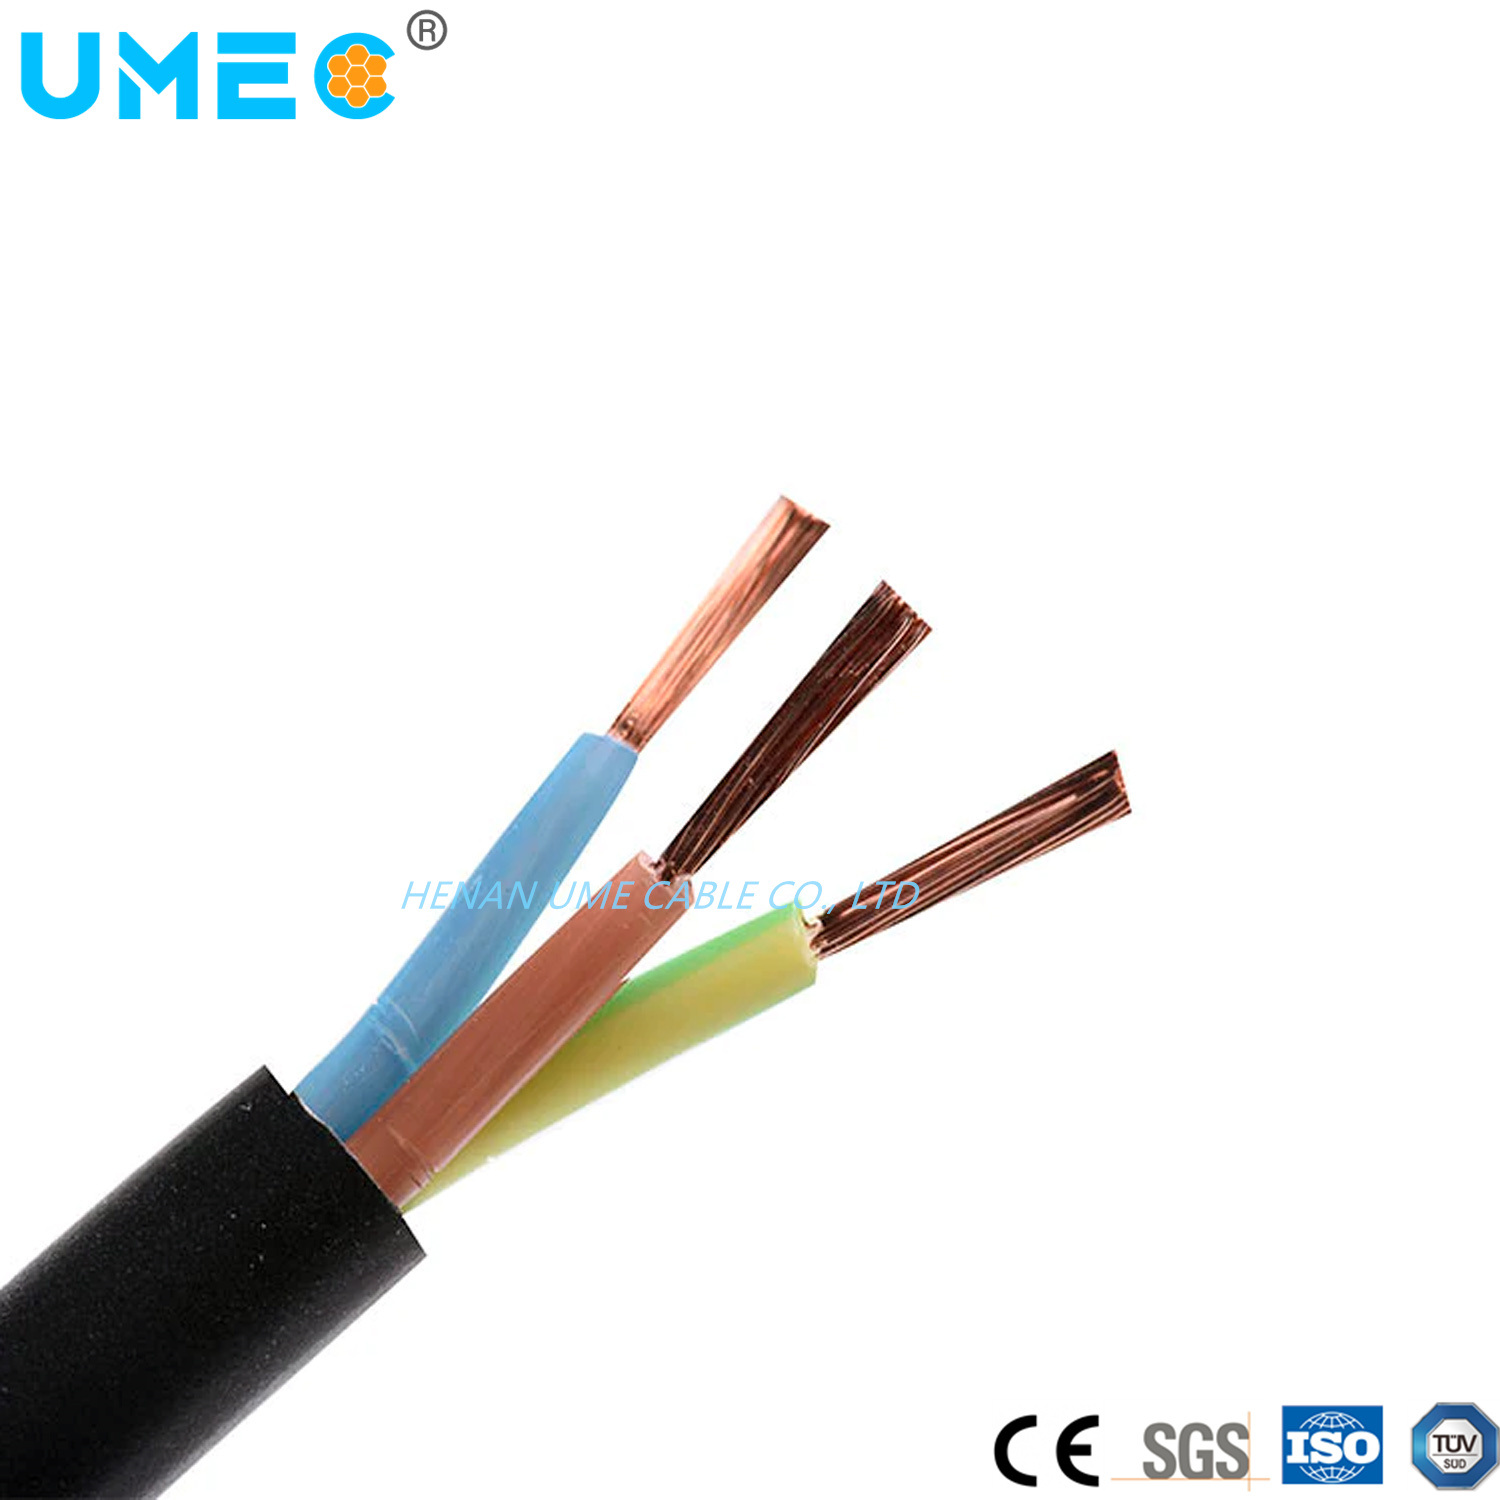 
                600V 3X14AWG 3X16AWG 3X18AWG 4X16AWG 4X18AWG Flexible Multiconductor Thhn Cable Thermoplastic Insulation with Nylon Tsj/Tsj-N Wire Cable
            